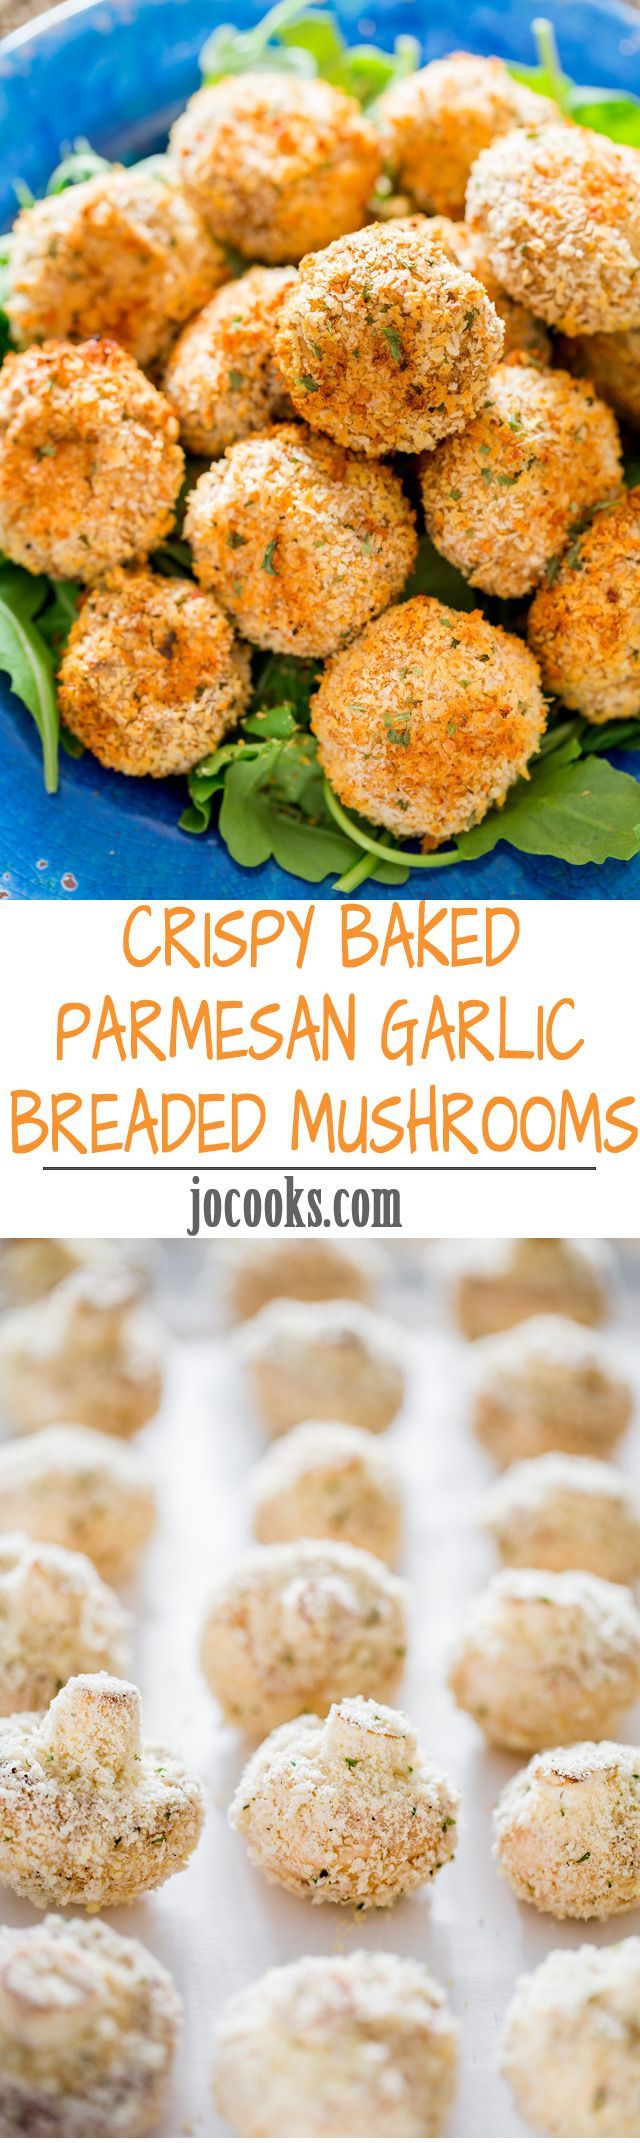 Crispy Baked Parmesan Garlic Breaded Mushrooms – enjoy this restaurant favorite without all the fat an